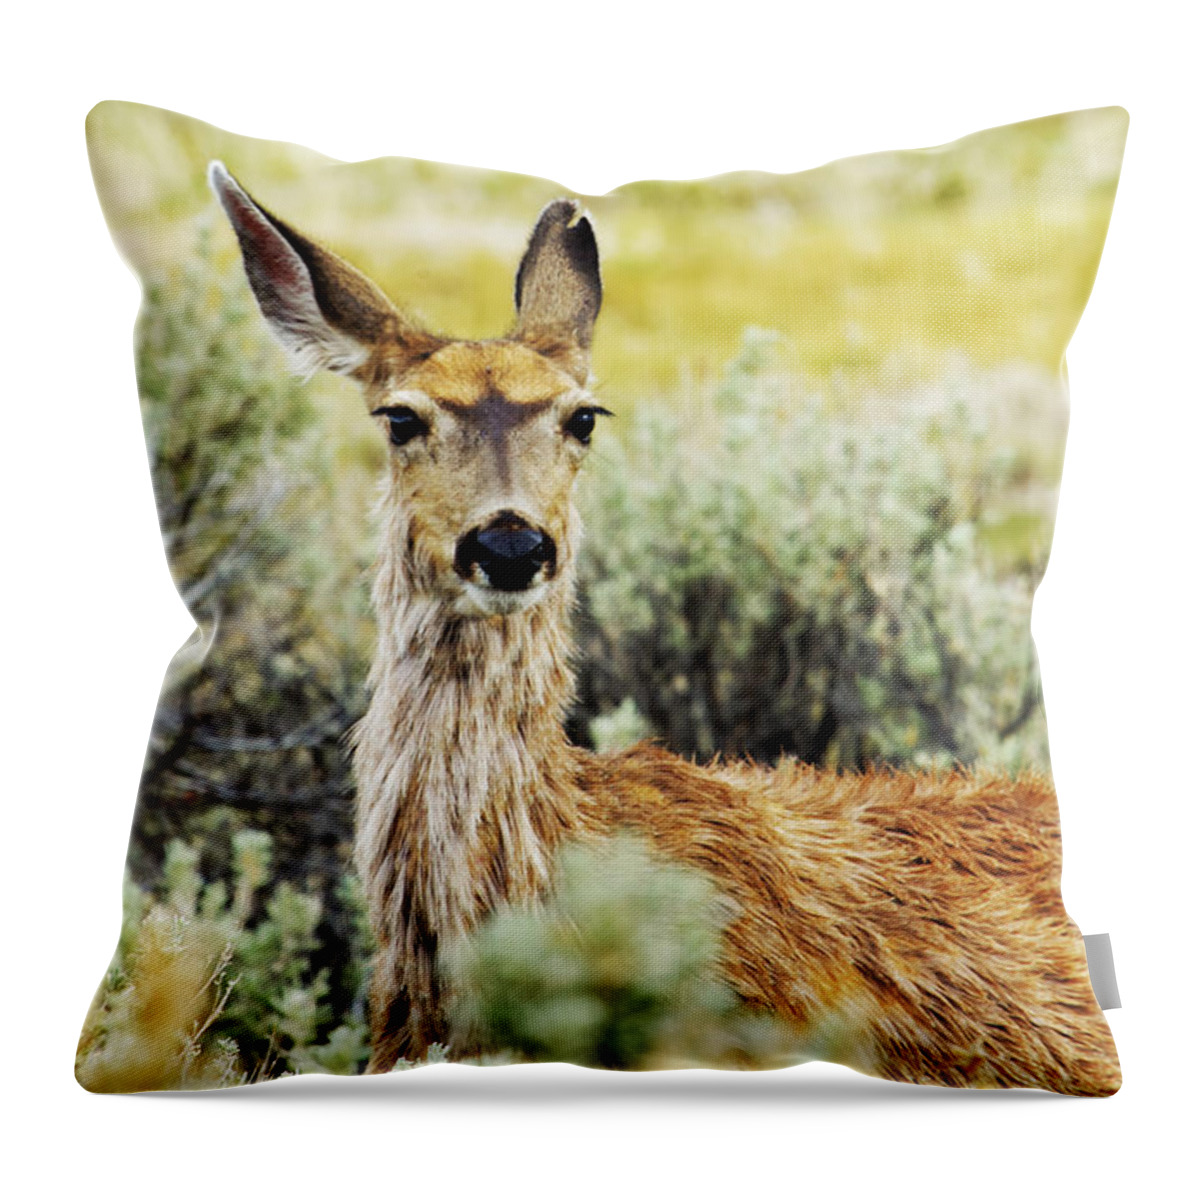 Mule Deer Throw Pillow featuring the photograph Surround Sound by Belinda Greb